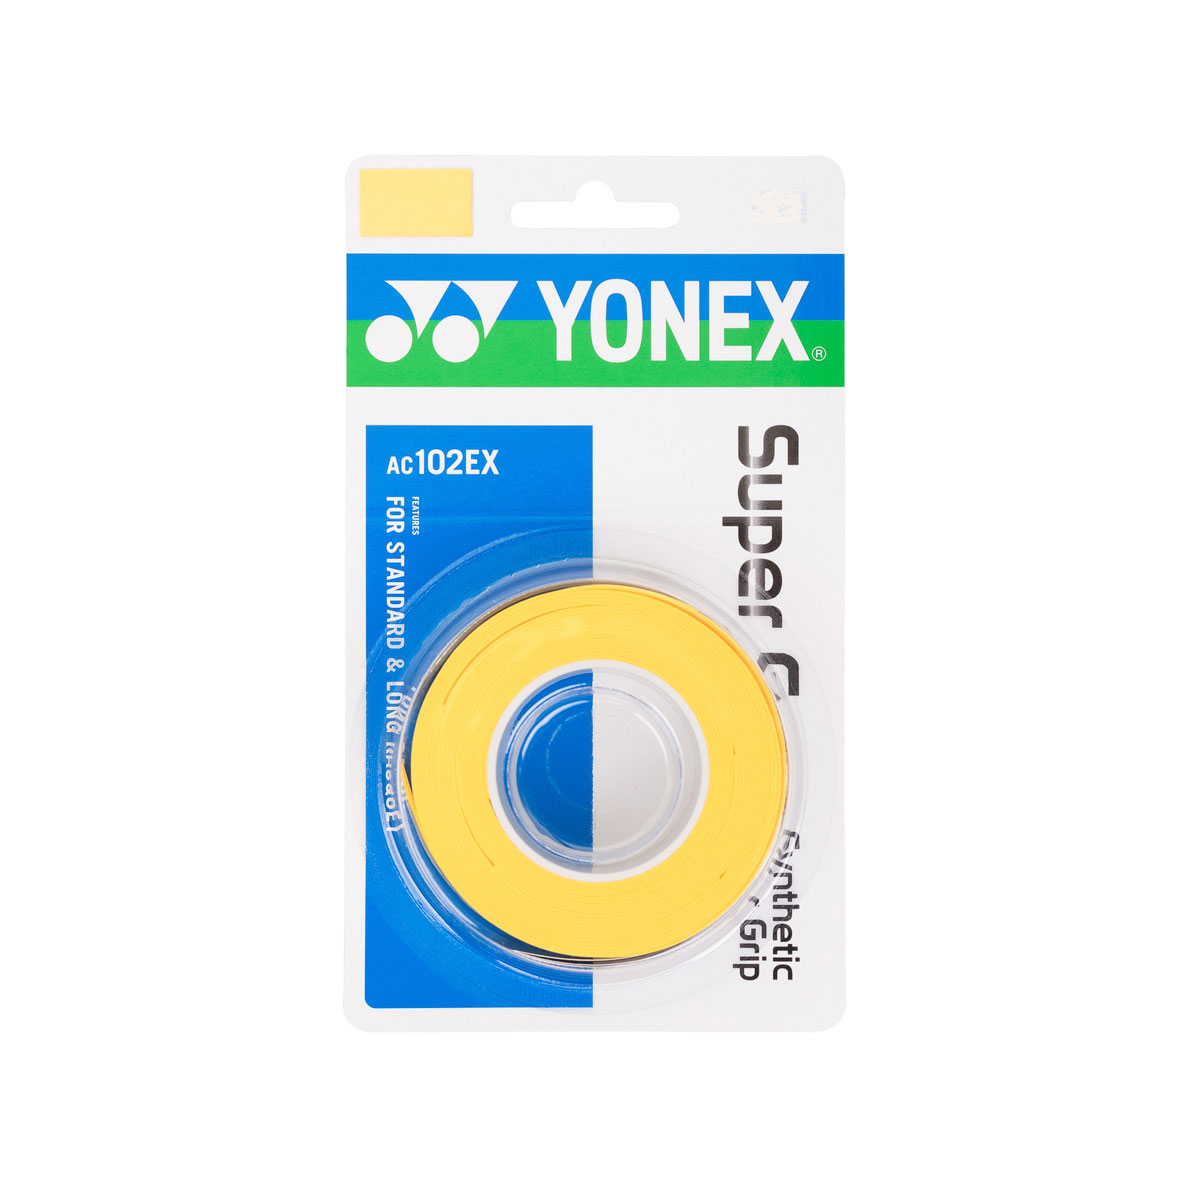 YONEX Super Grap Synthetic Over Grip 3 Stk. - Weinrot